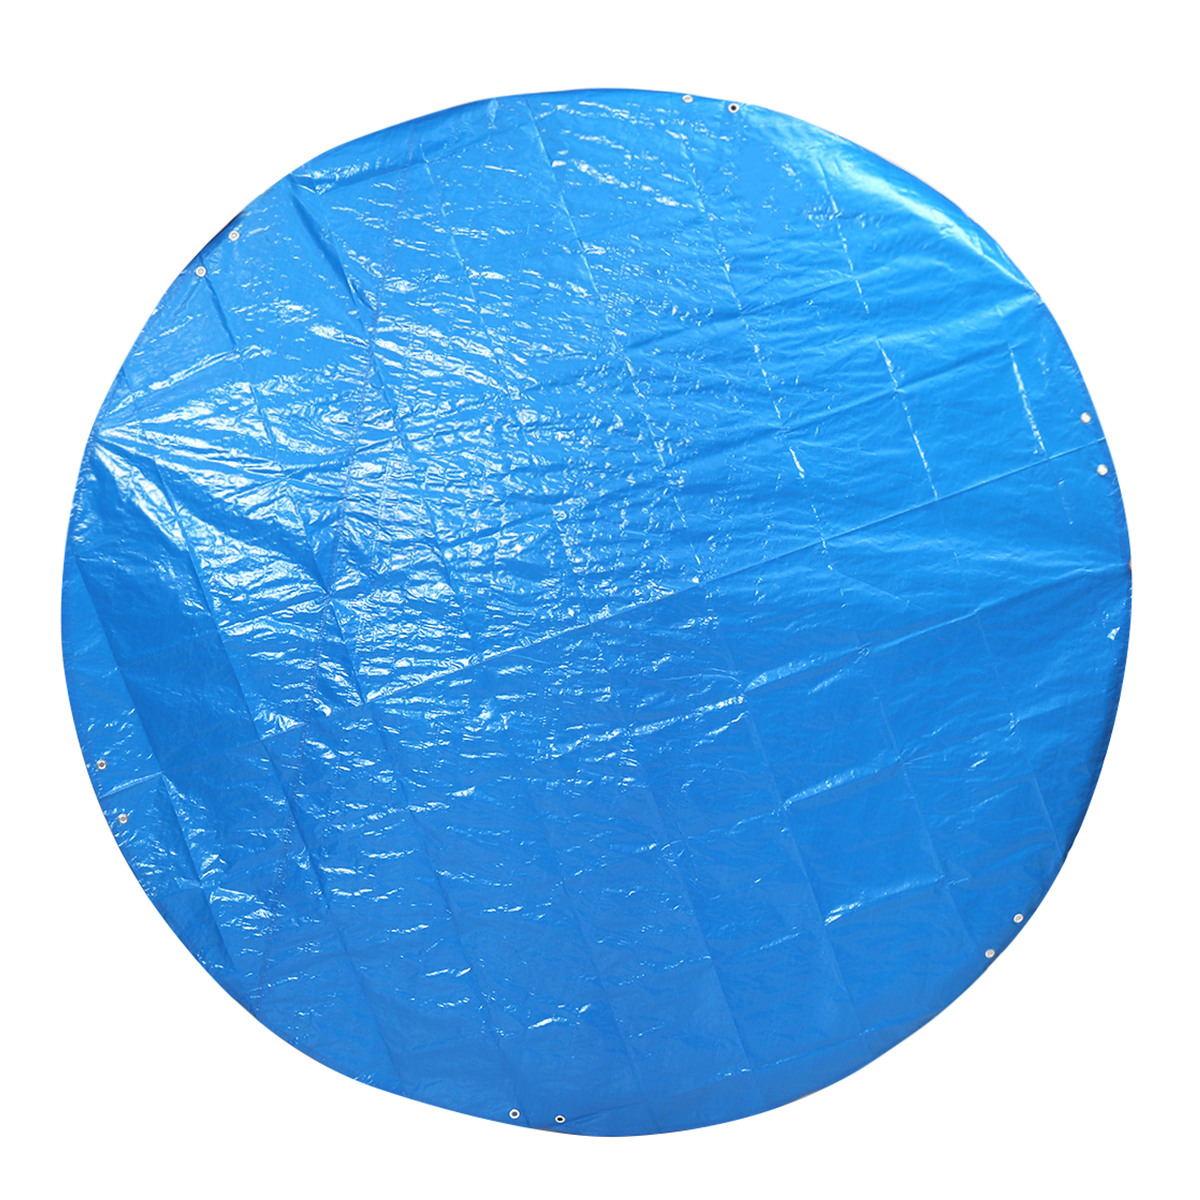 15ft-Inflatable-Swimming-Pool-Protective-Cover-Dustproof-Protection-Mat-For-Outdoor-Backyard-Garden-1718614-4